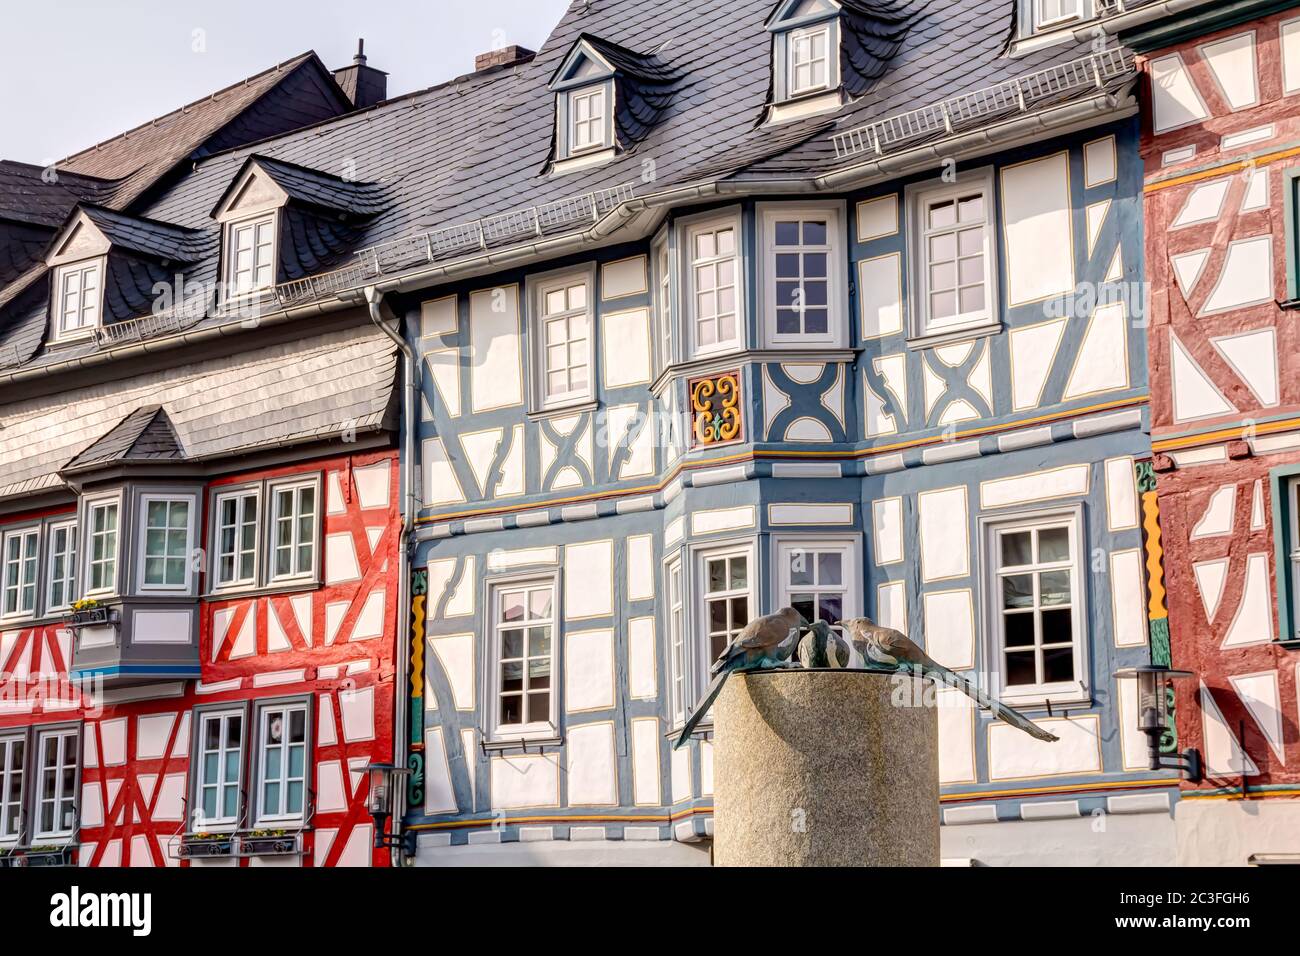 Half-timbered houses in the historic center of Bad Camberg in Hesse, Germany Stock Photo